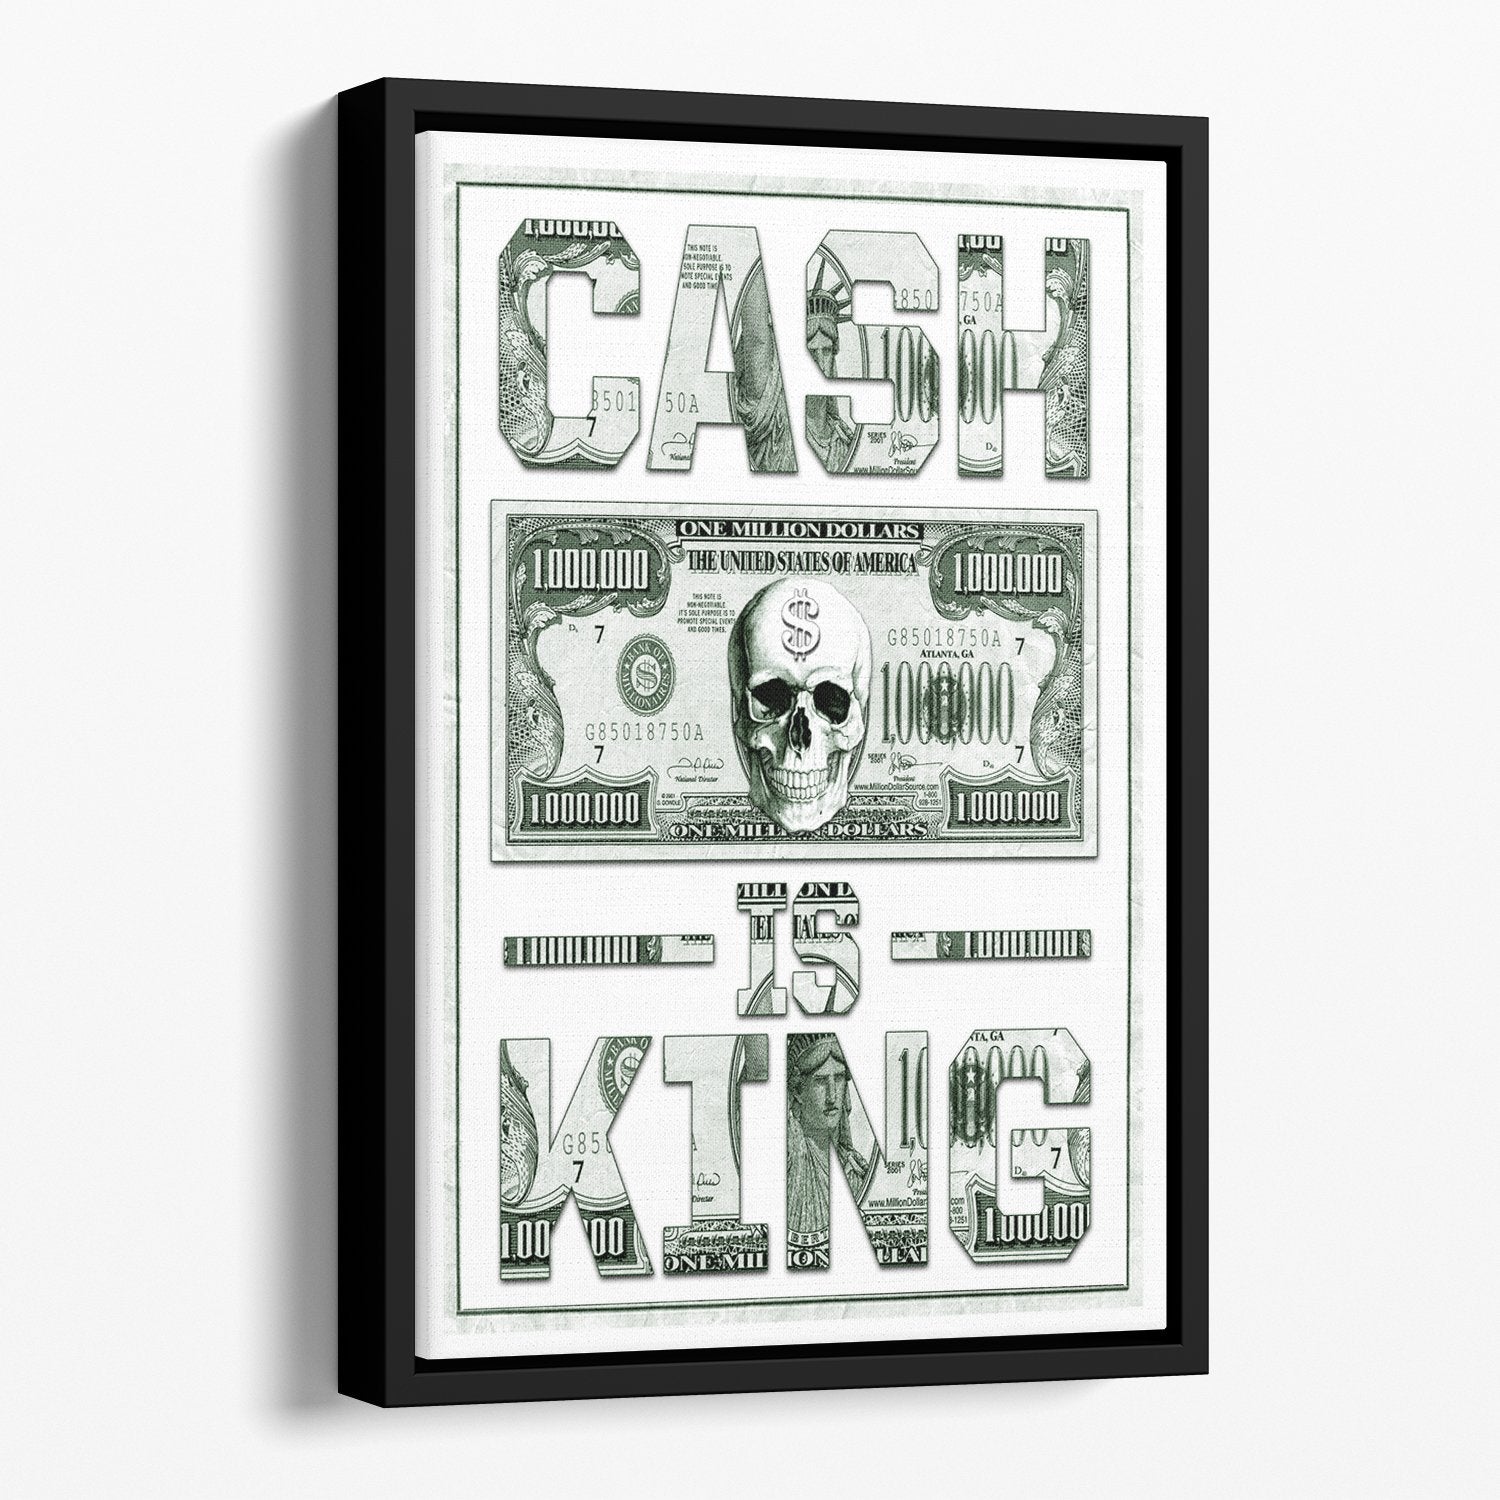 Cash is King Canvas